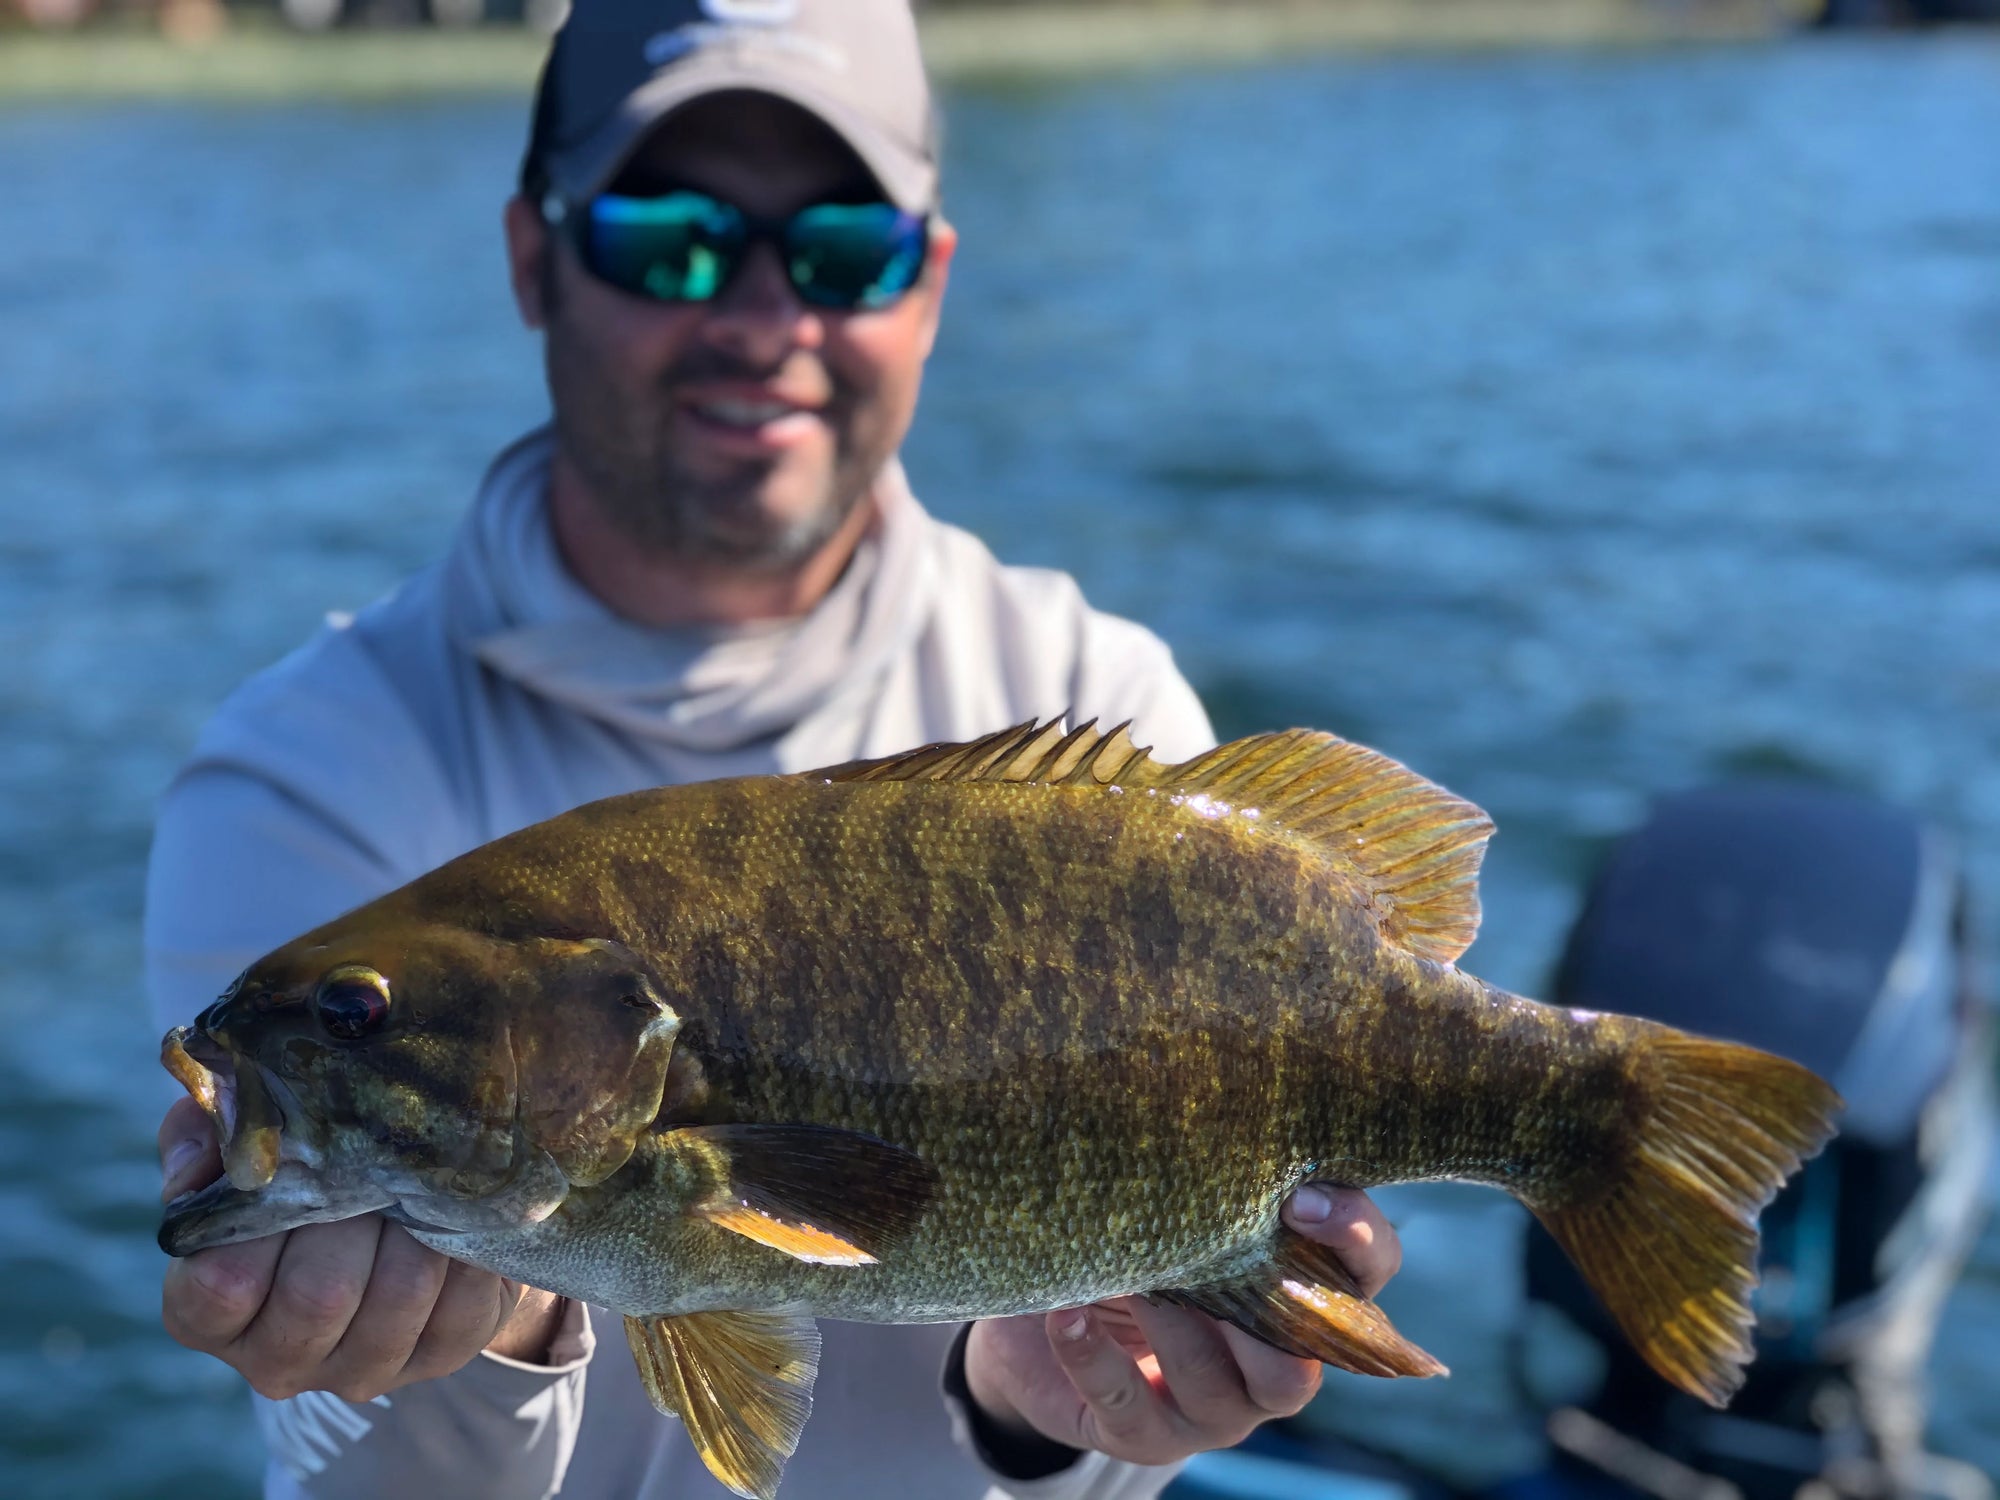 Fishing for Northern Smallmouth – Cortland Line Company